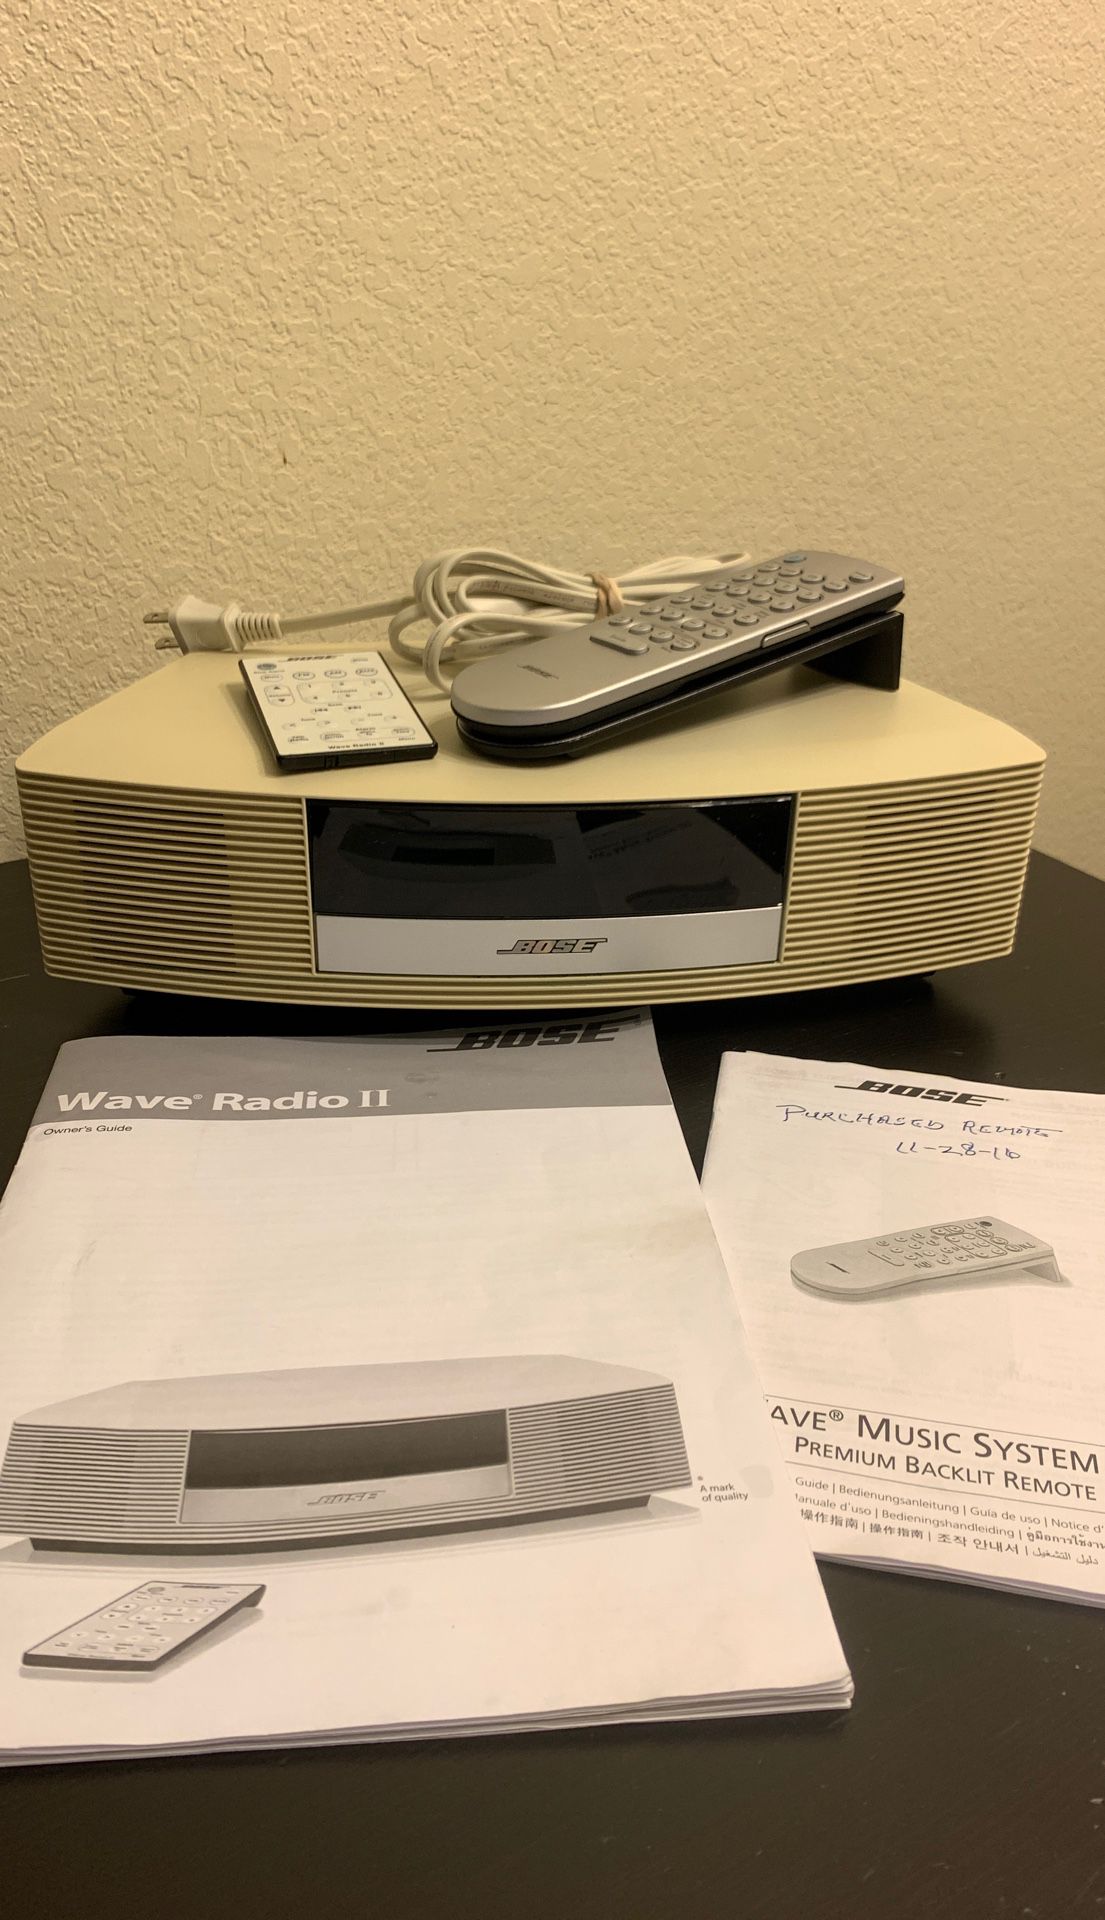 BOSE Wave Radio II with Wave Music System III premium backlit remote